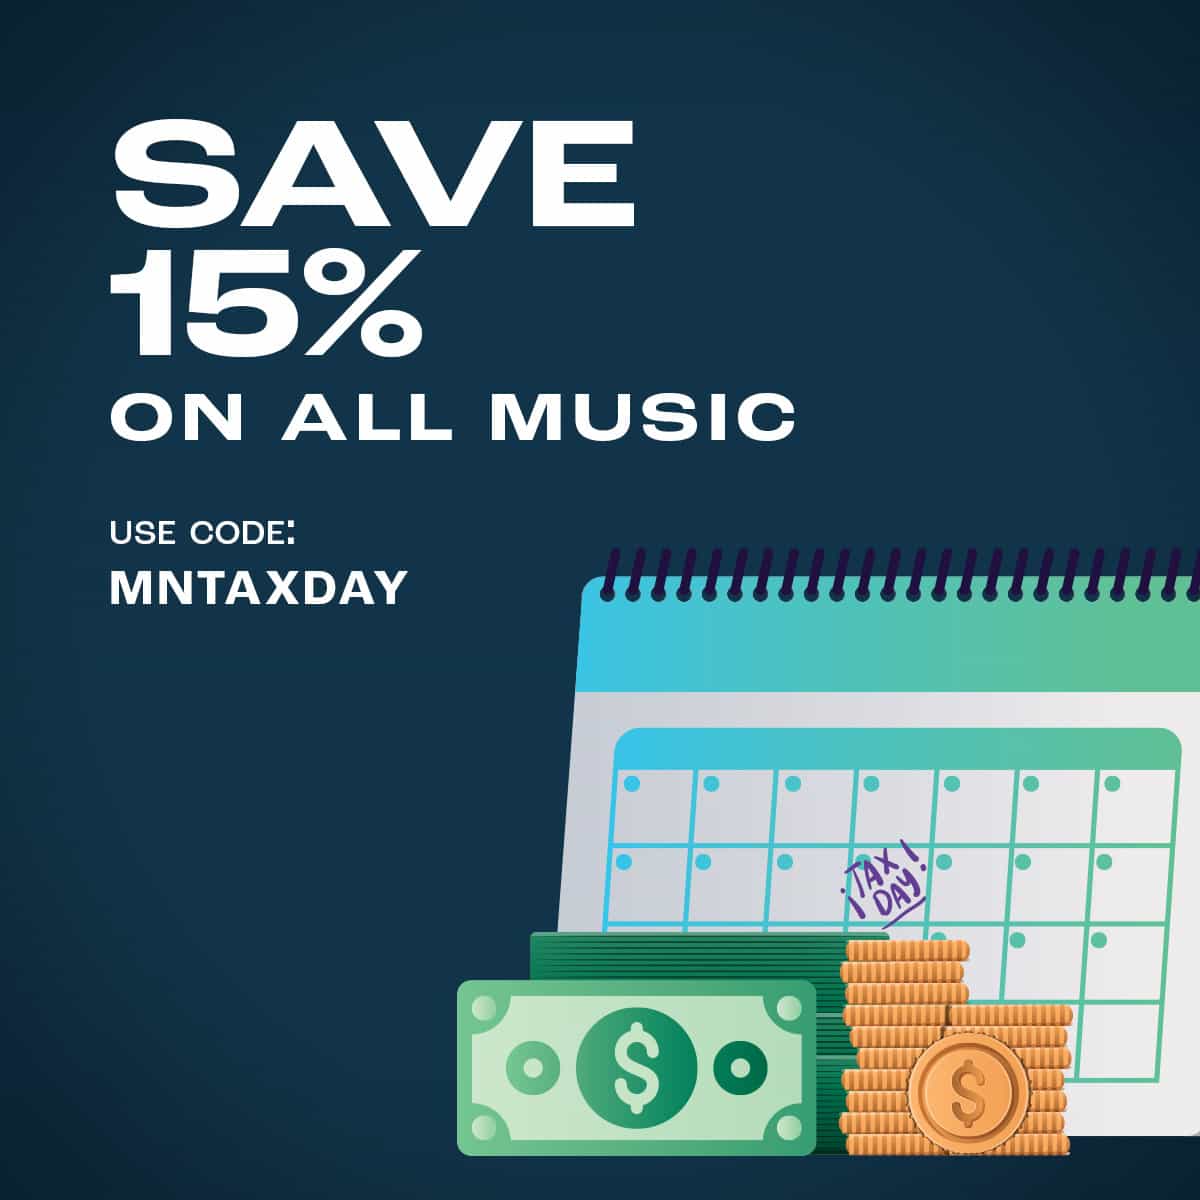 We're kicking off Tax Weekend with a special offer! Now through Monday, April 15th, take 15% off sheet music with promo code MNTAXDAY. Whether you're a beginner or a pro, find the perfect arrangement for your next performance on Musicnotes.com 🎶 #taxday #taxweekend